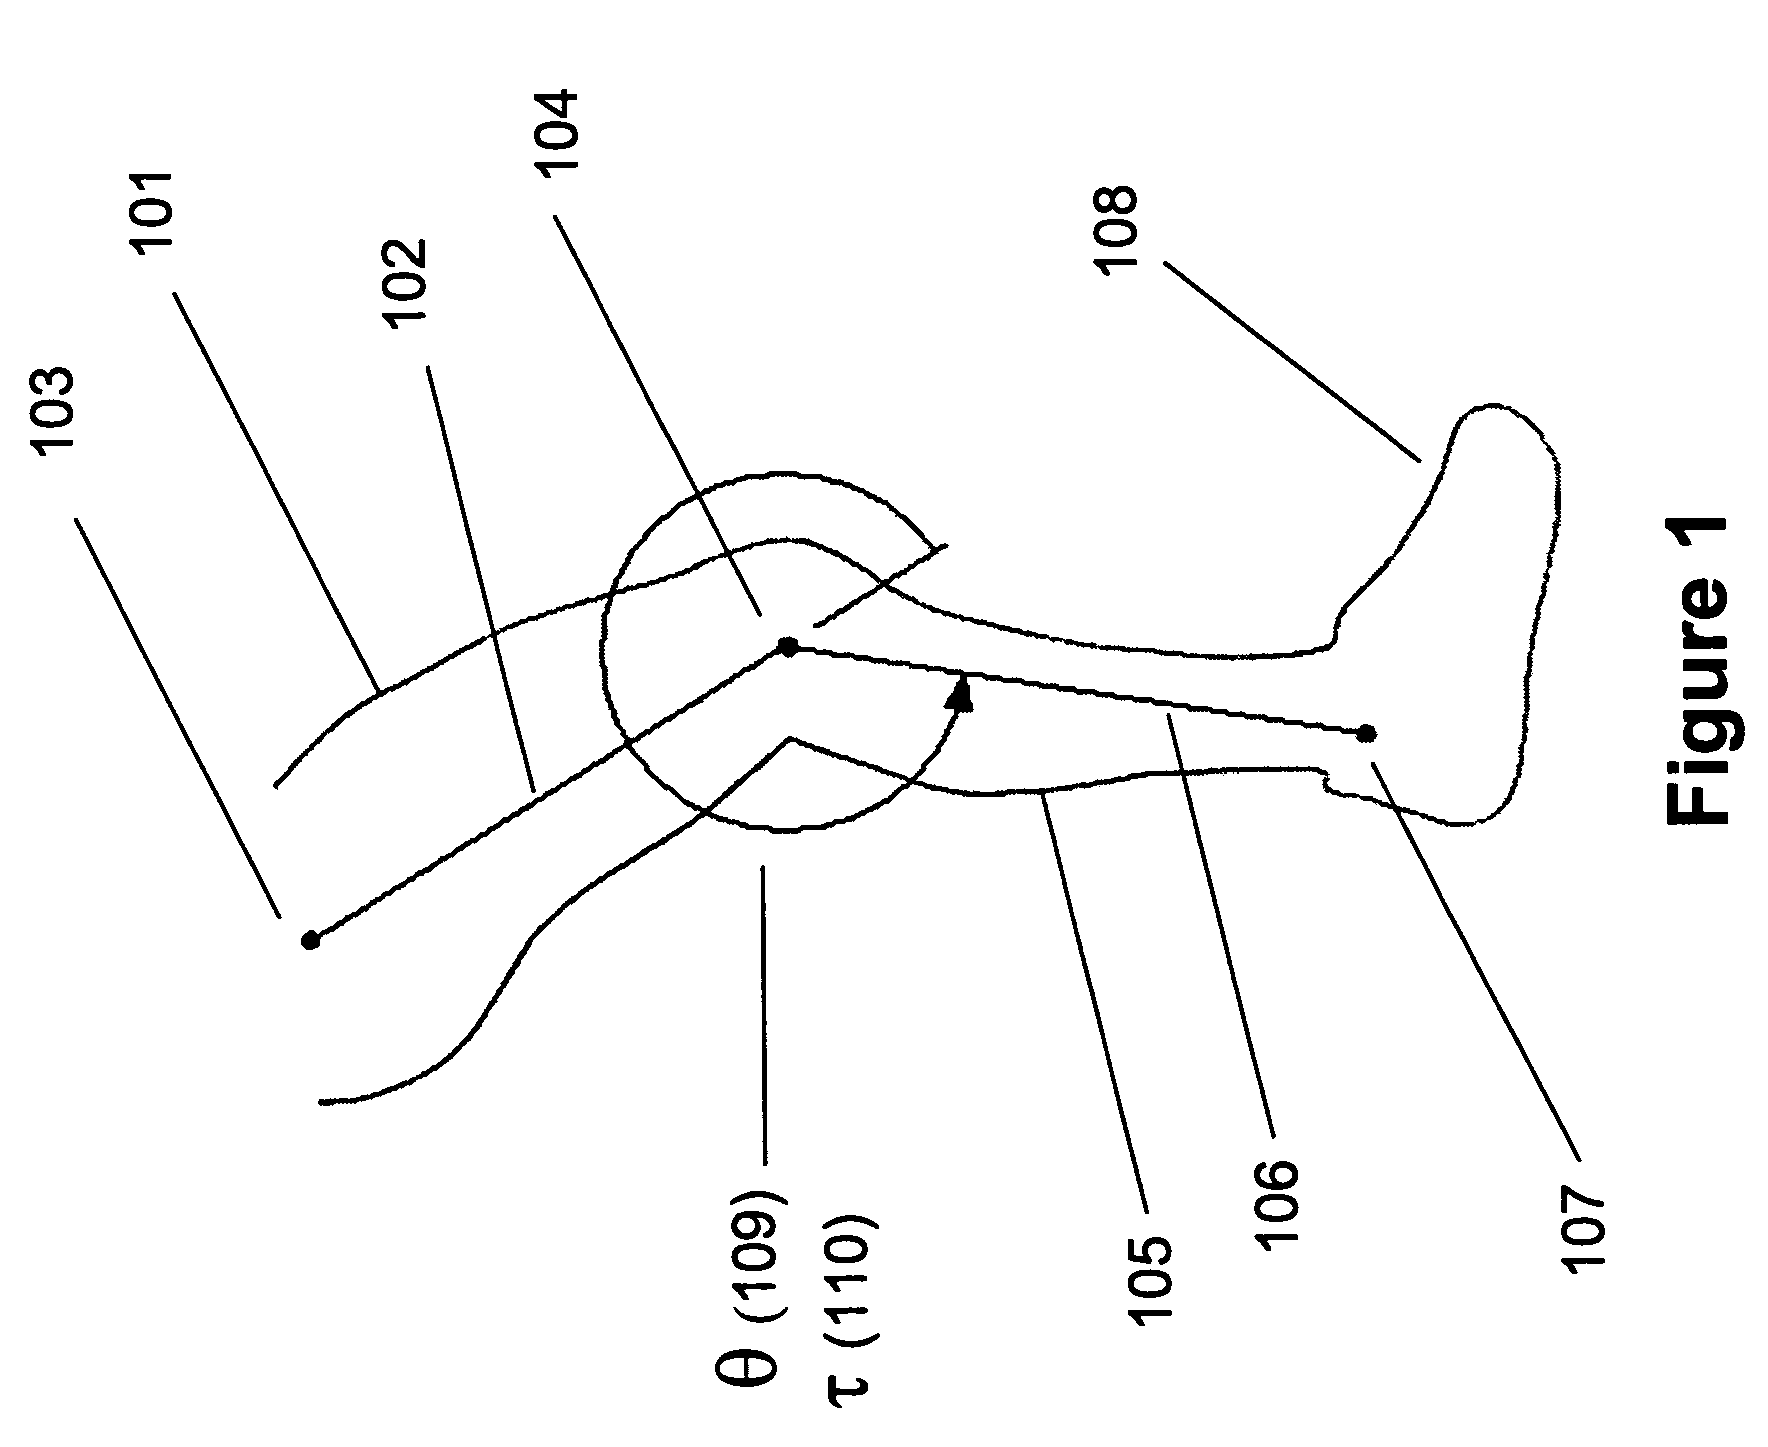 Methods and devices for selective exercising of muscles